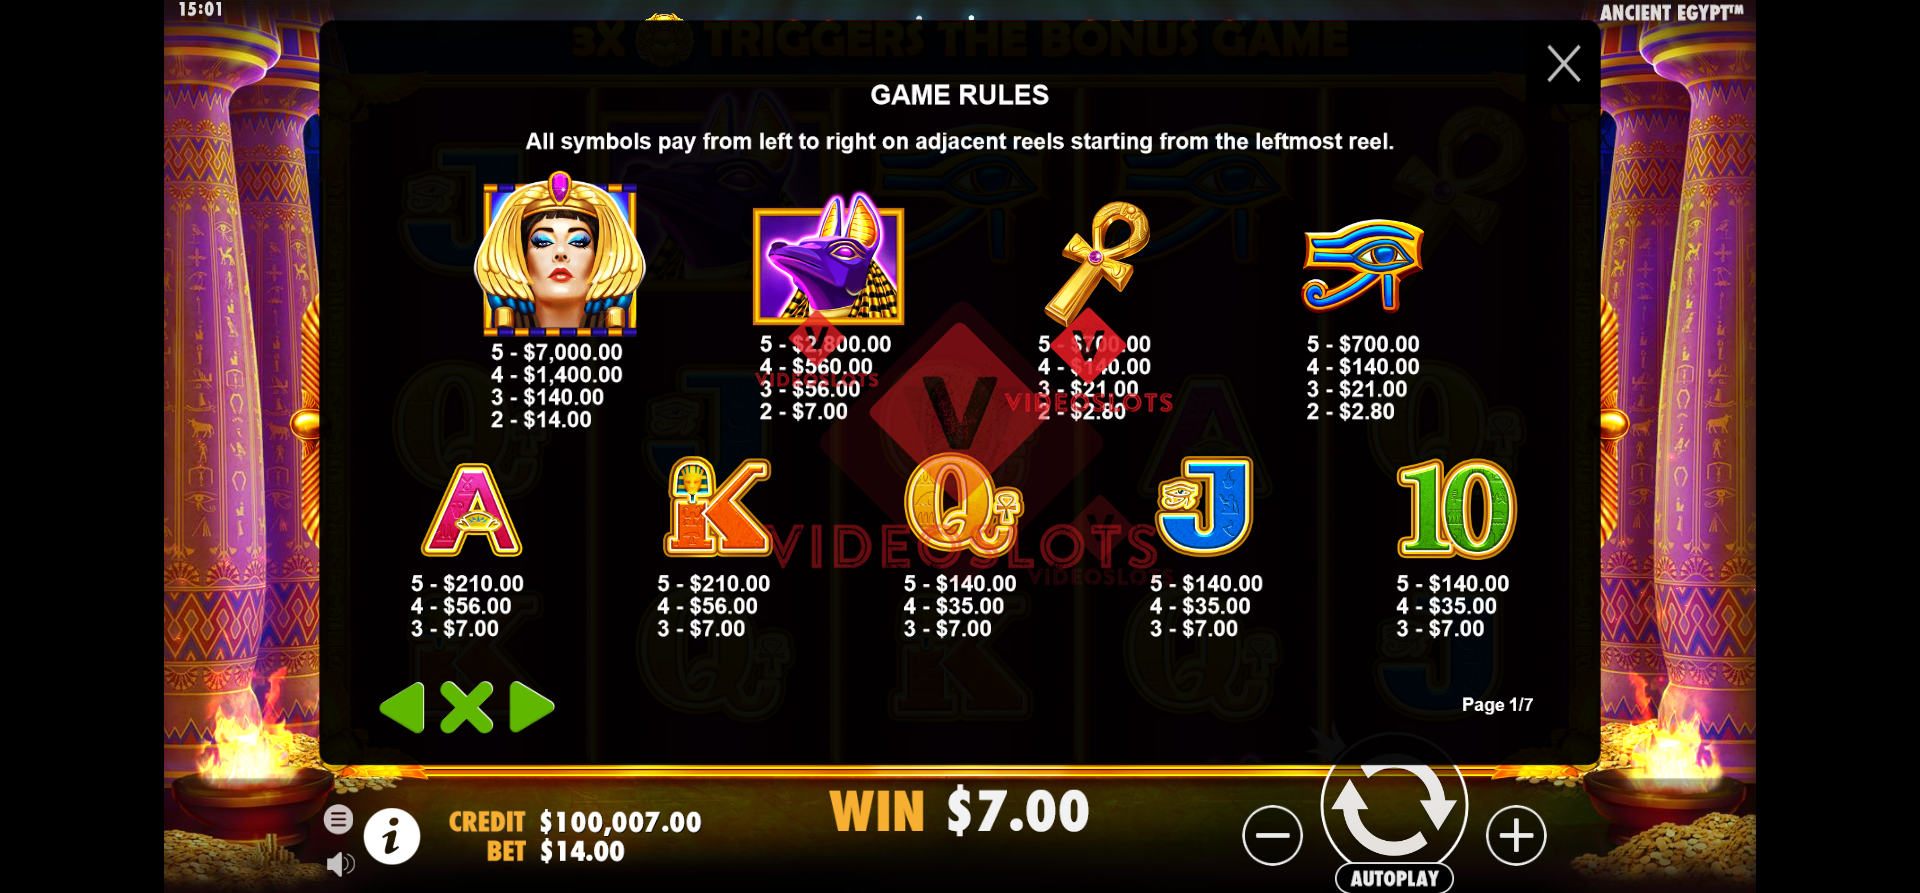 Pay Table for Ancient Egypt slot by Pragmatic Play